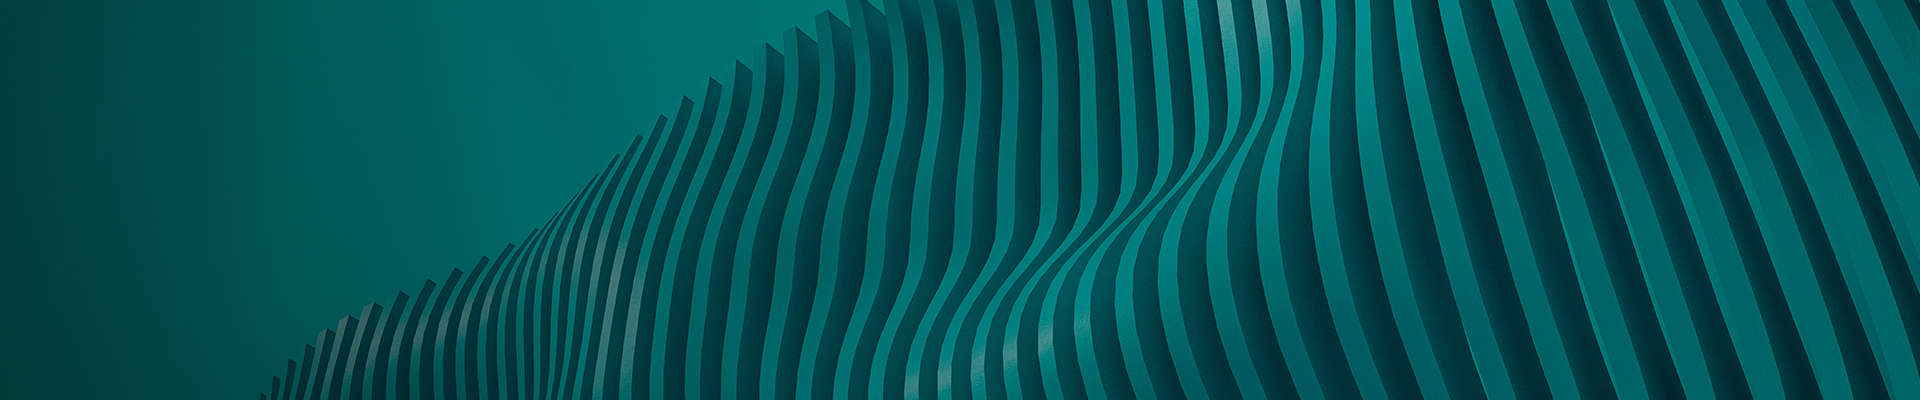 Abstract green wave graphics 